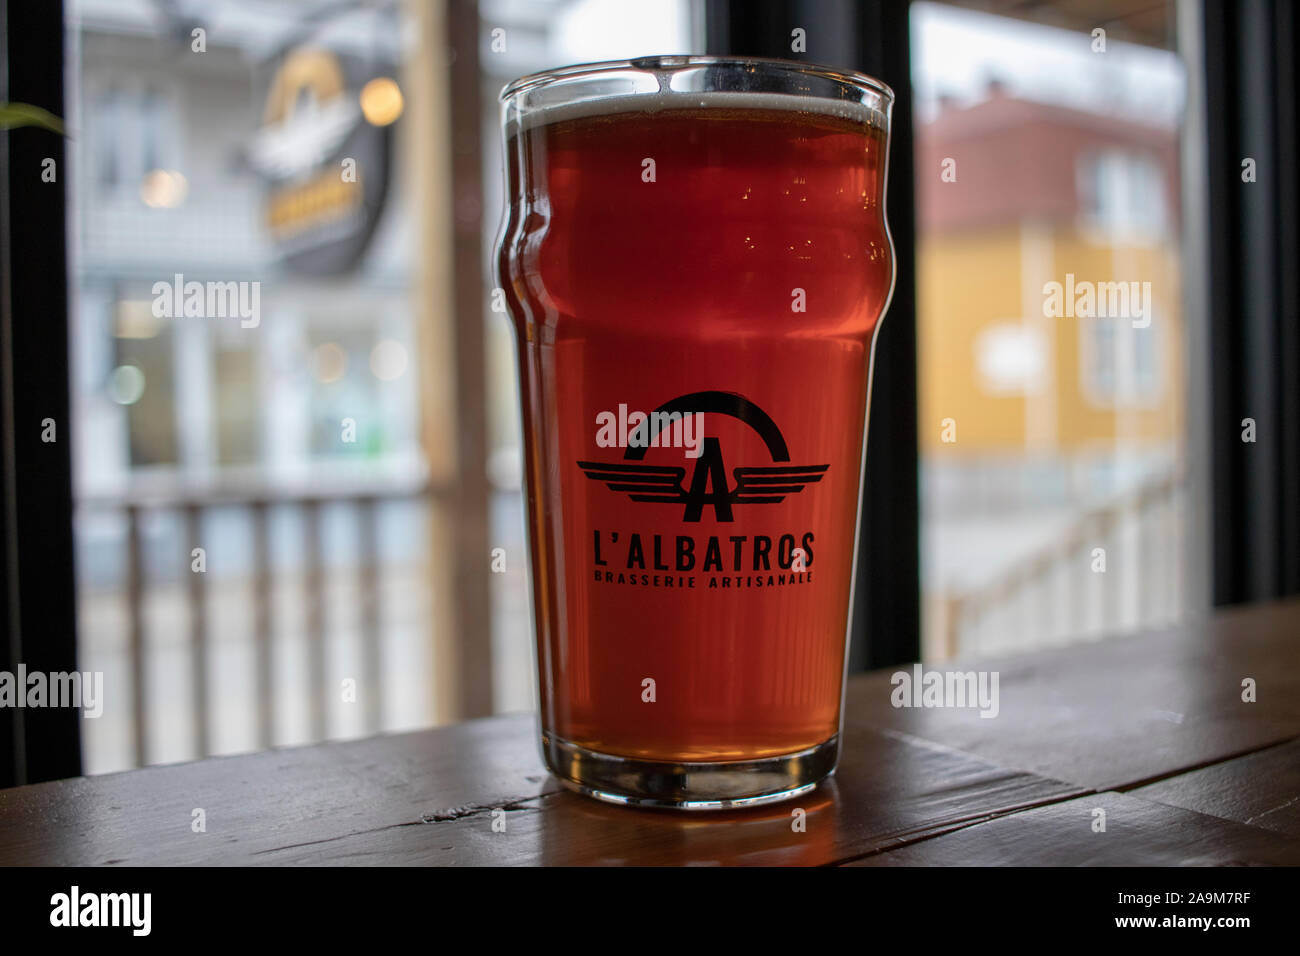 Mascouche, Lanaudière, Québec, Canada- November 10, 2019: Pint of beer at L'Albatros Brasserie artisanale, Craft Brewery Stock Photo